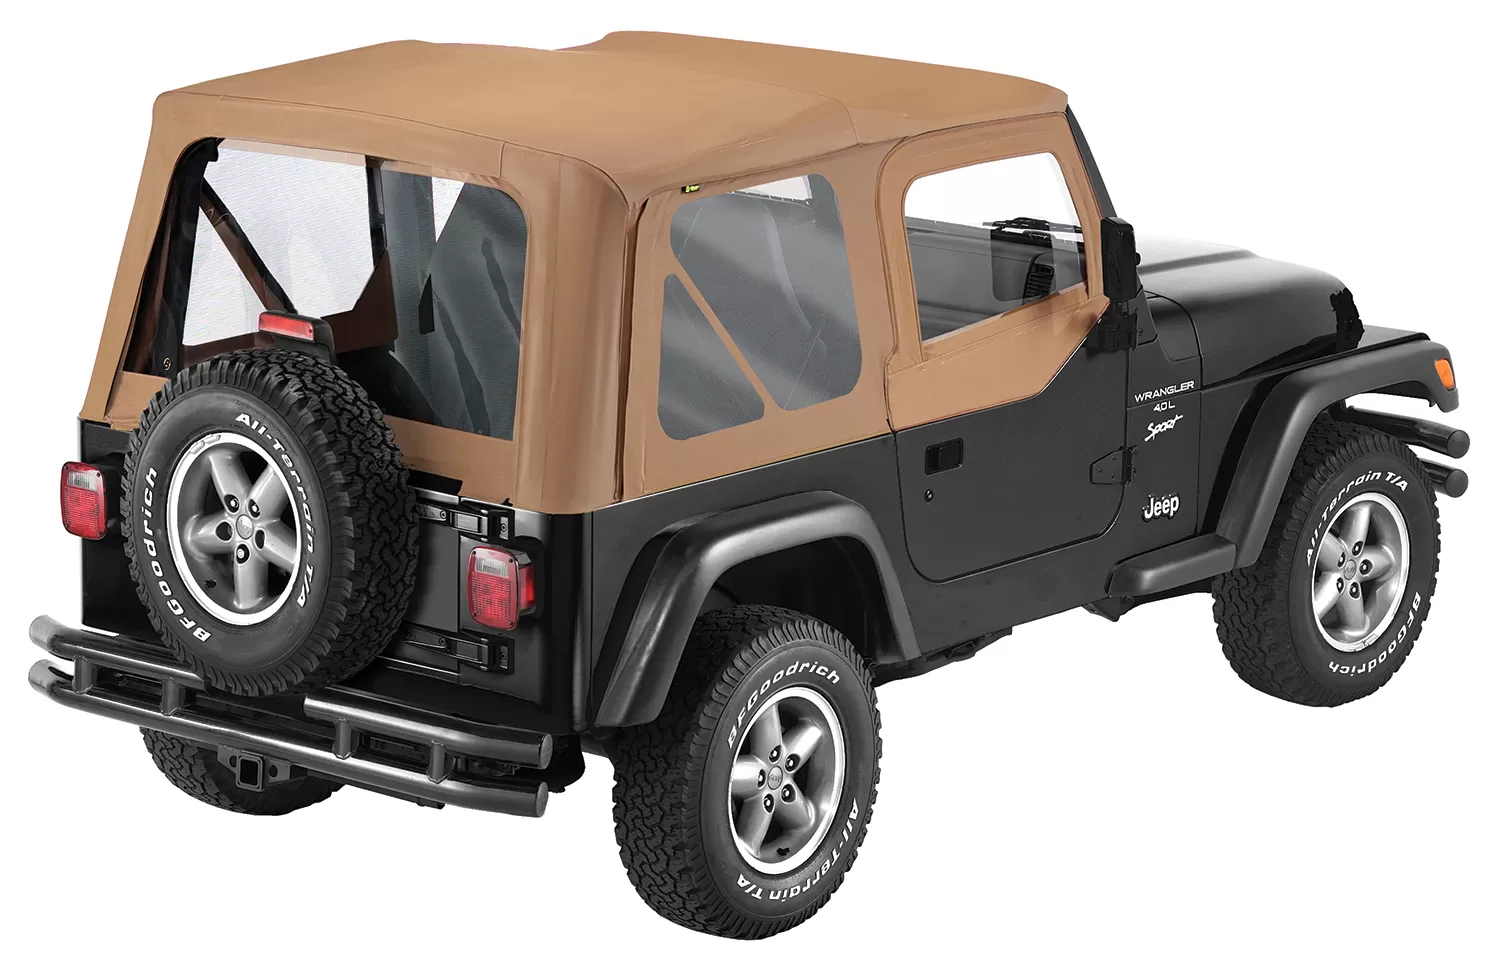 Pavement Ends By Bestop Spice Replay OEM Replacement Soft Top Clear Windows Jeep Wrangler 1997-2006 - 51131-37